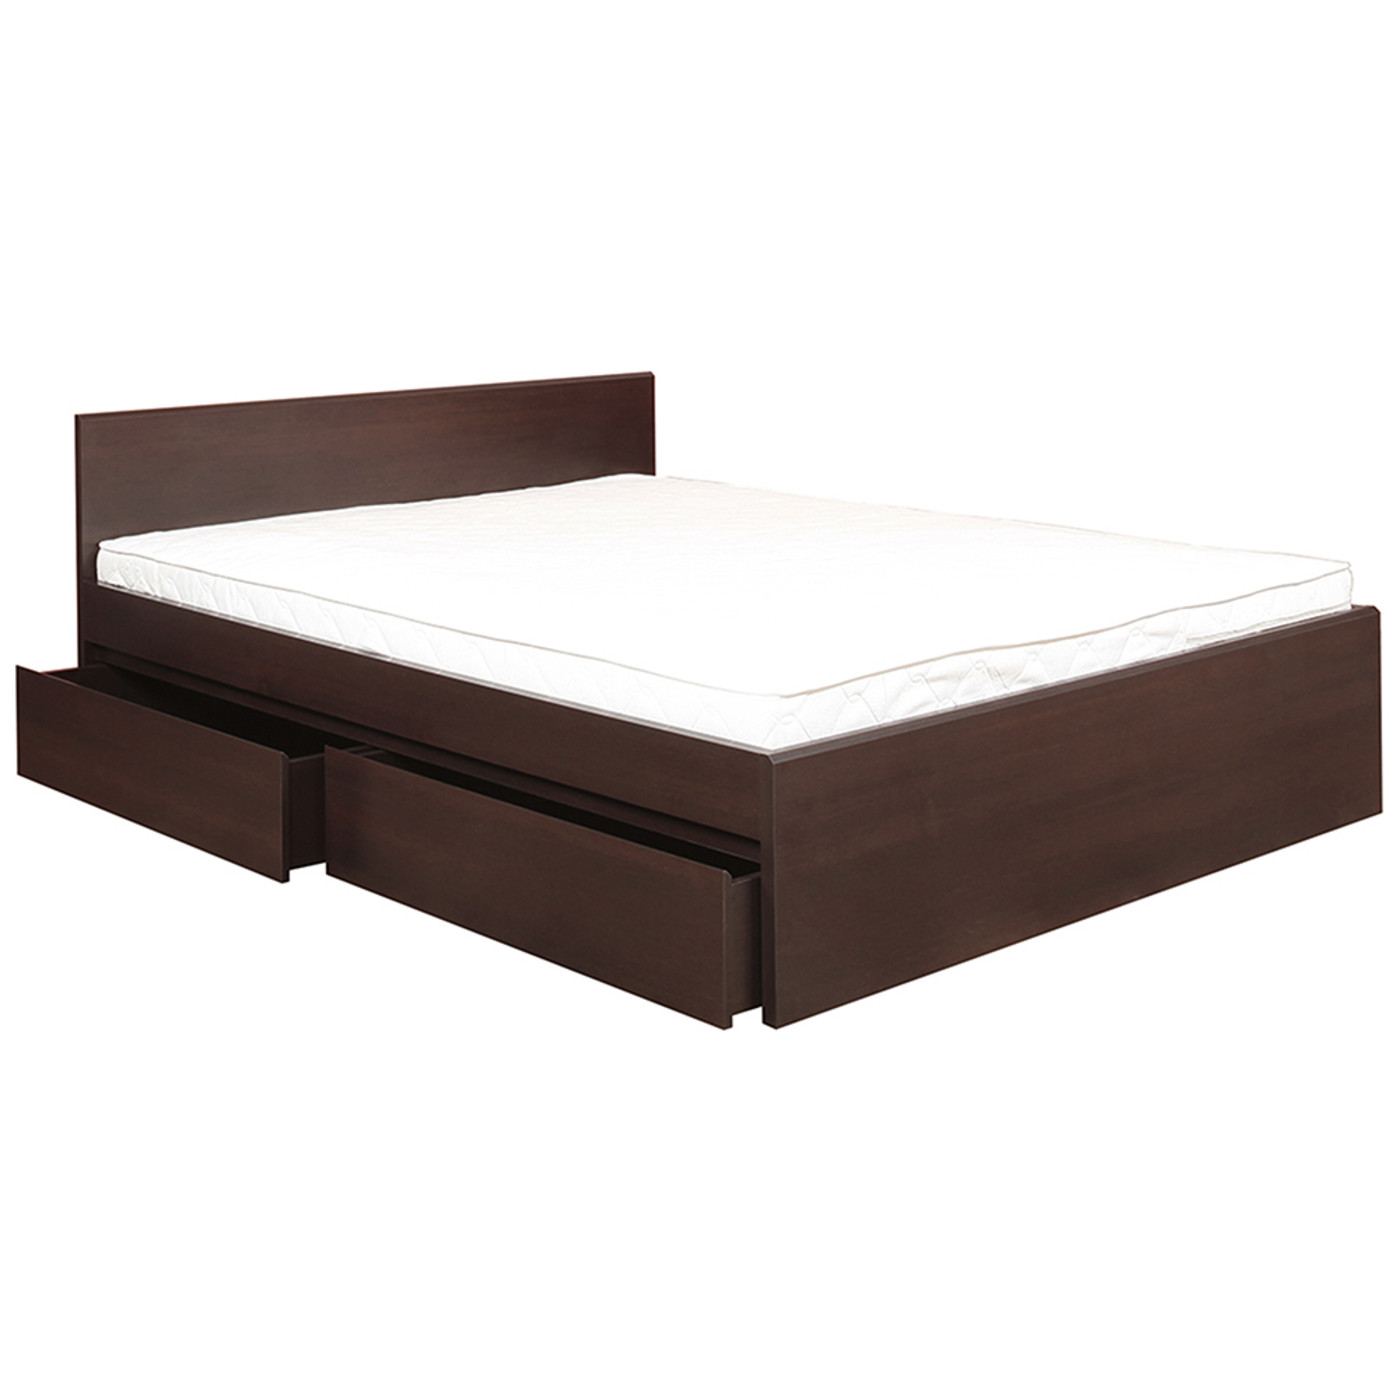 Pello 160 Cm Kingsize Bed With Under Bed Drawers In Dark Mahogany